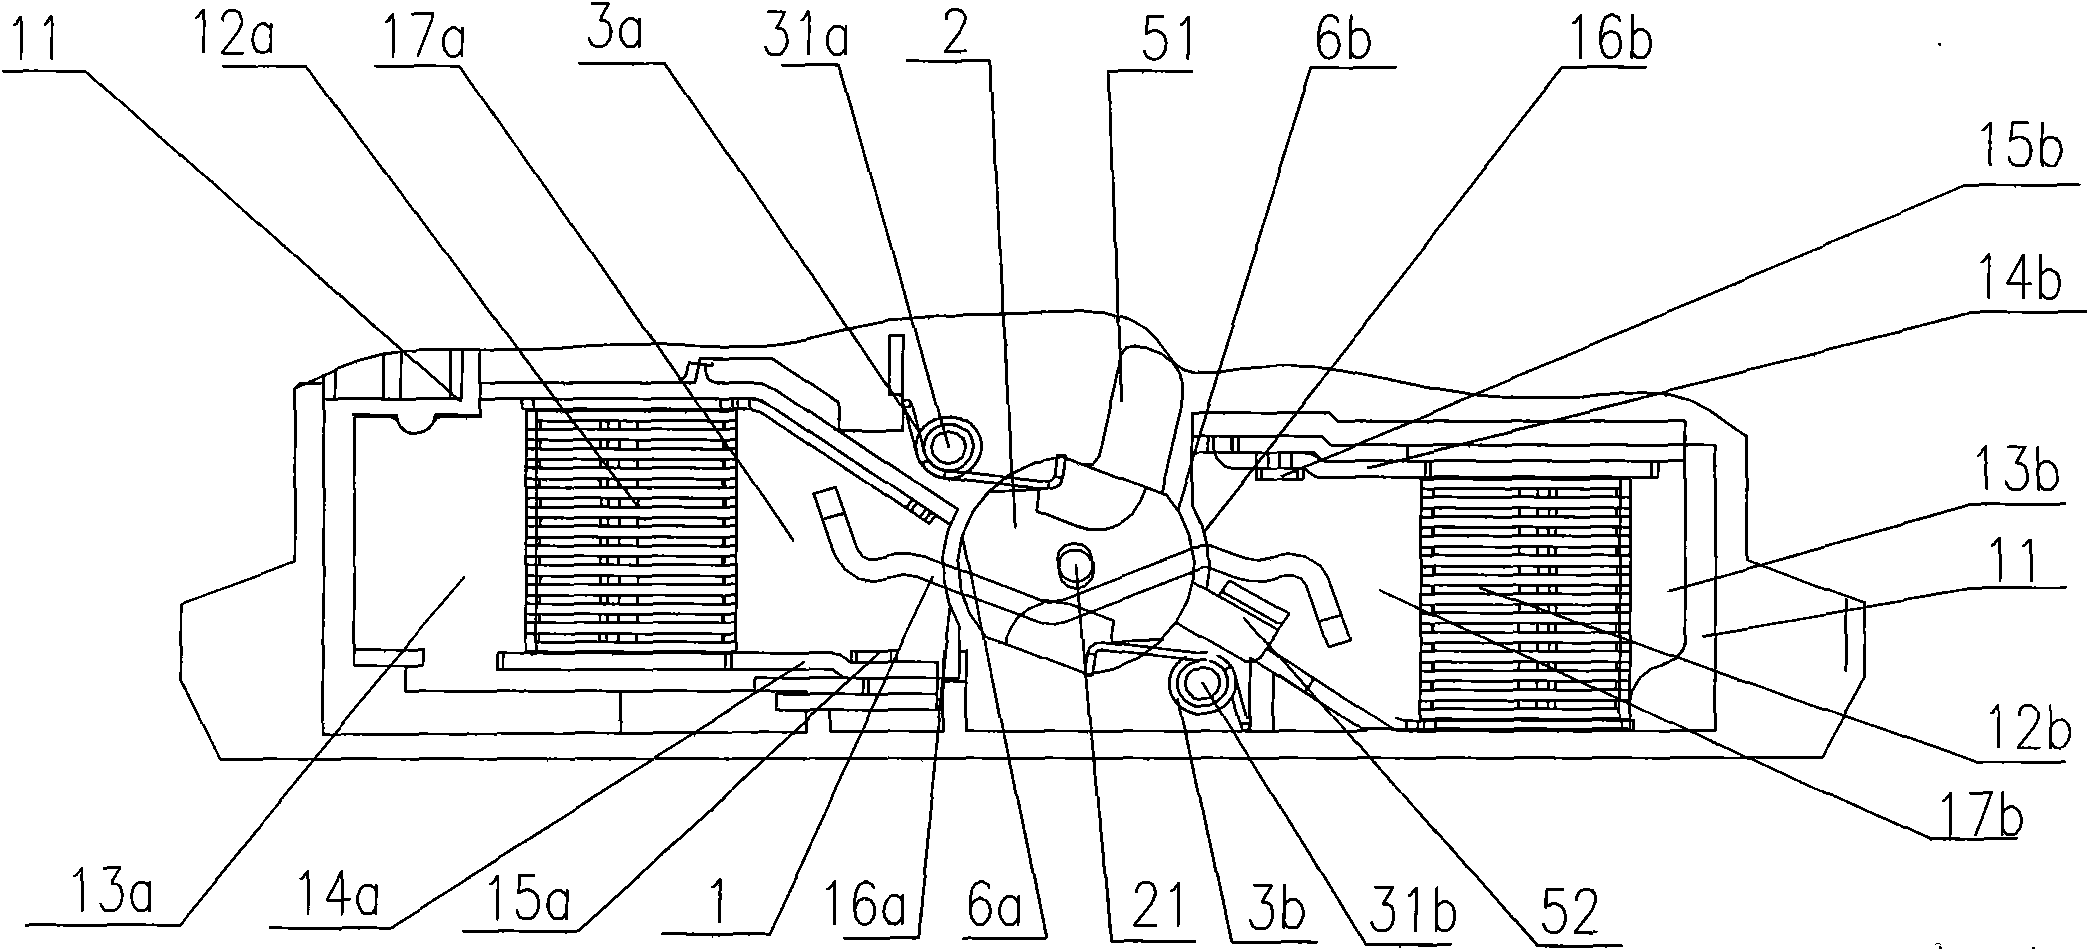 Circuit-breaker automatic closing contact device with high breaking capacity